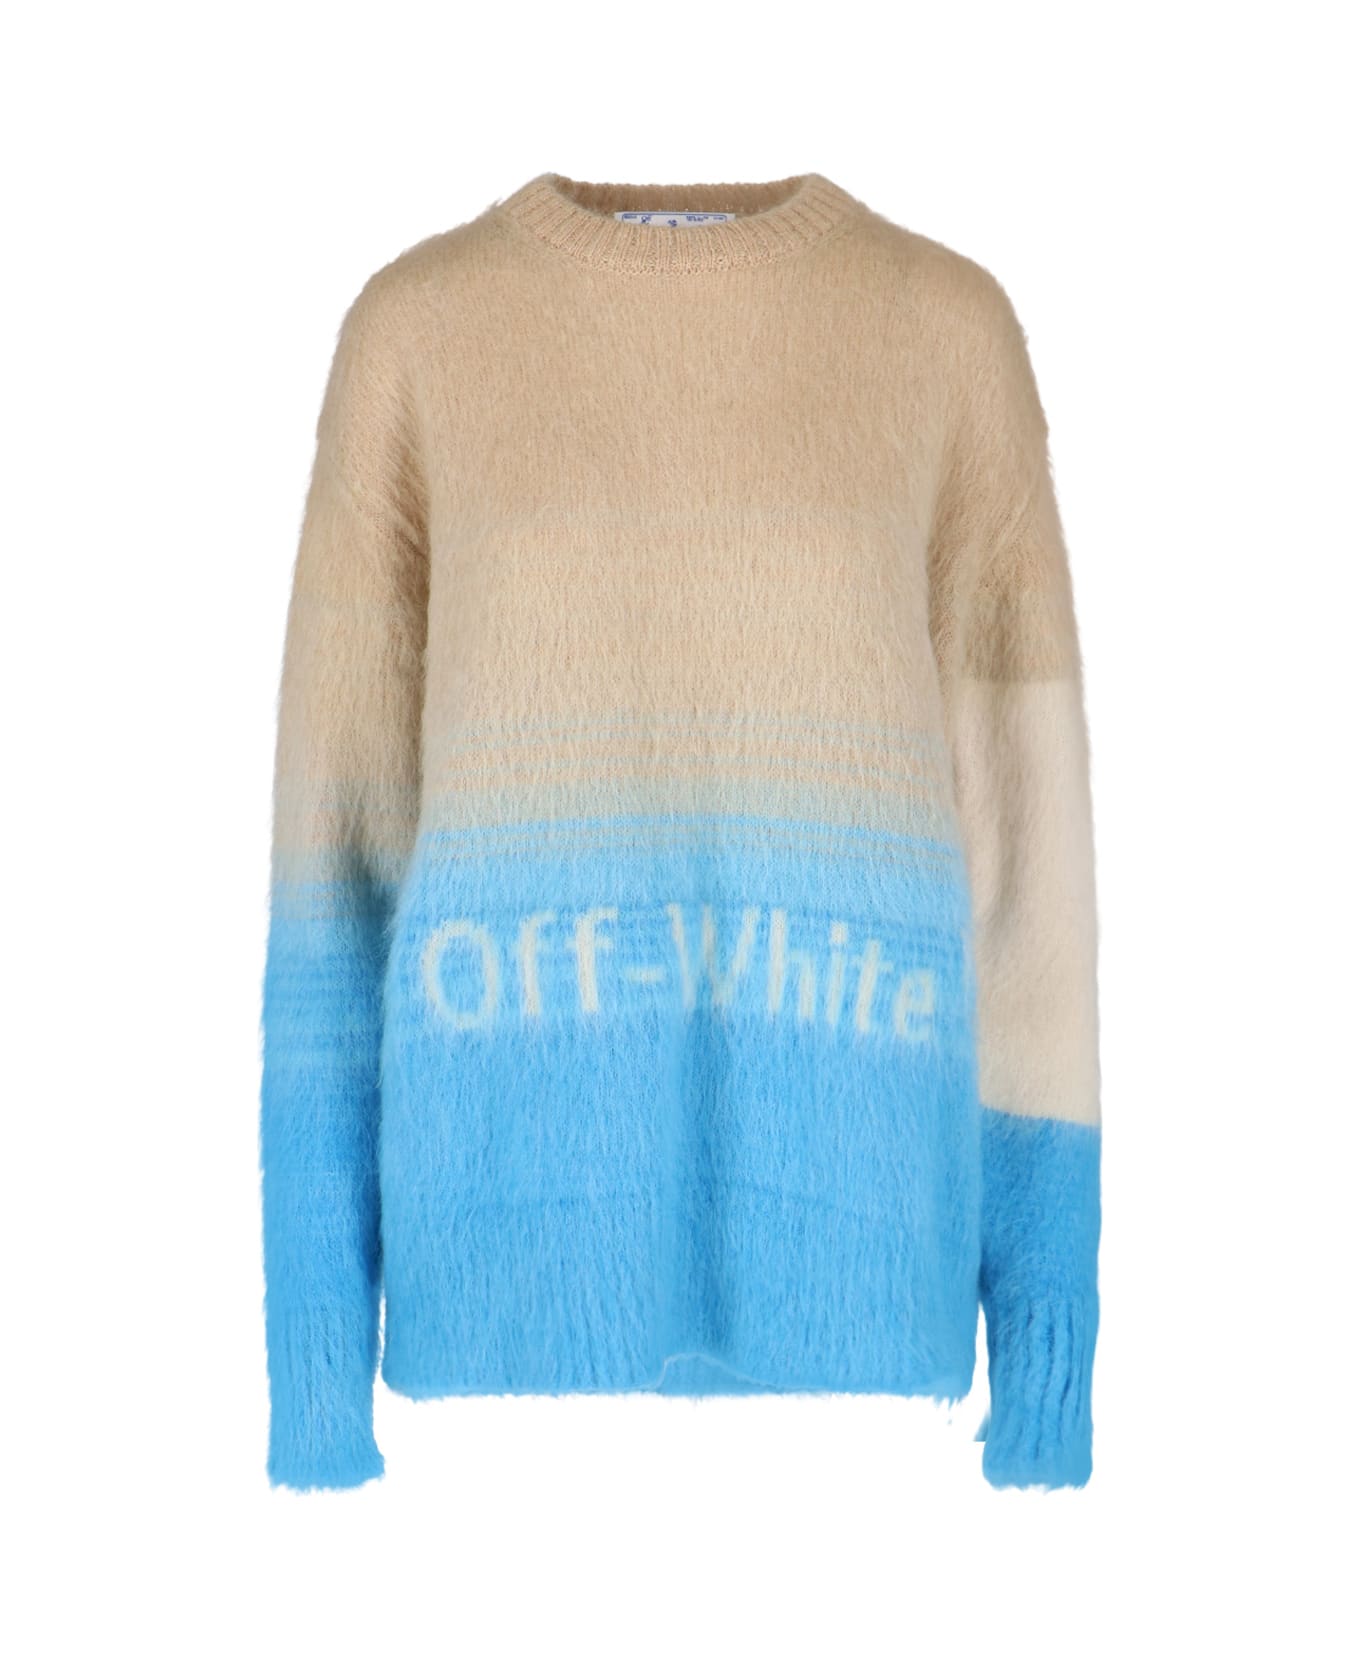 Off-White Multicolor Mohair Blend Sweater - Beige